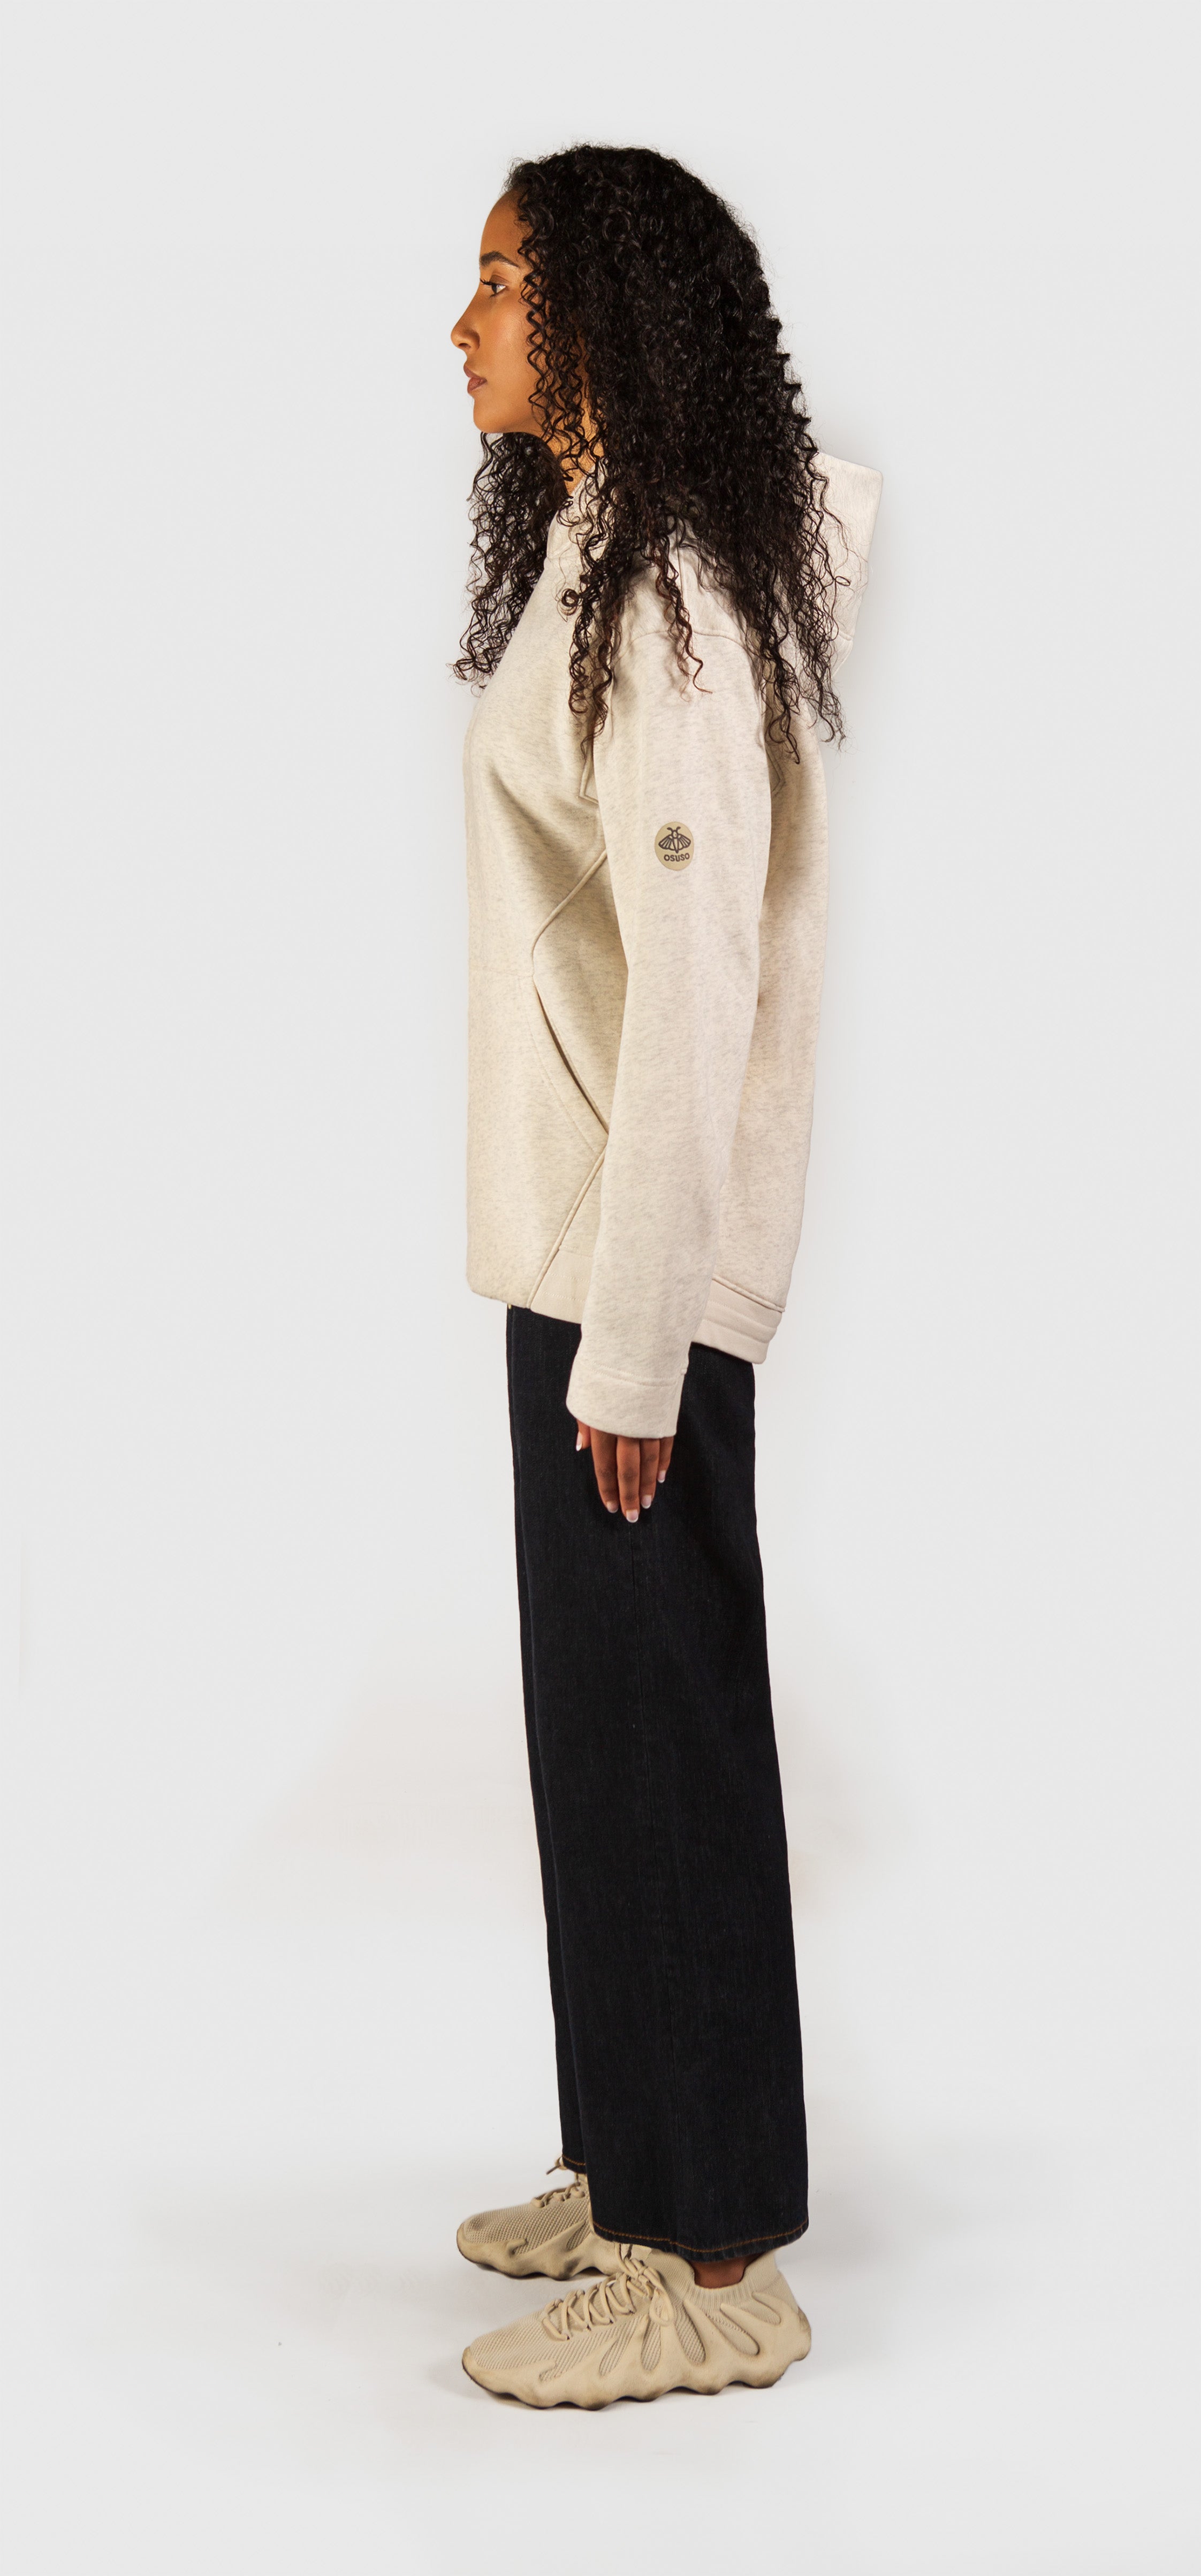 Delphine – Fleece Pull-over Hoodie in Offwhite Heather